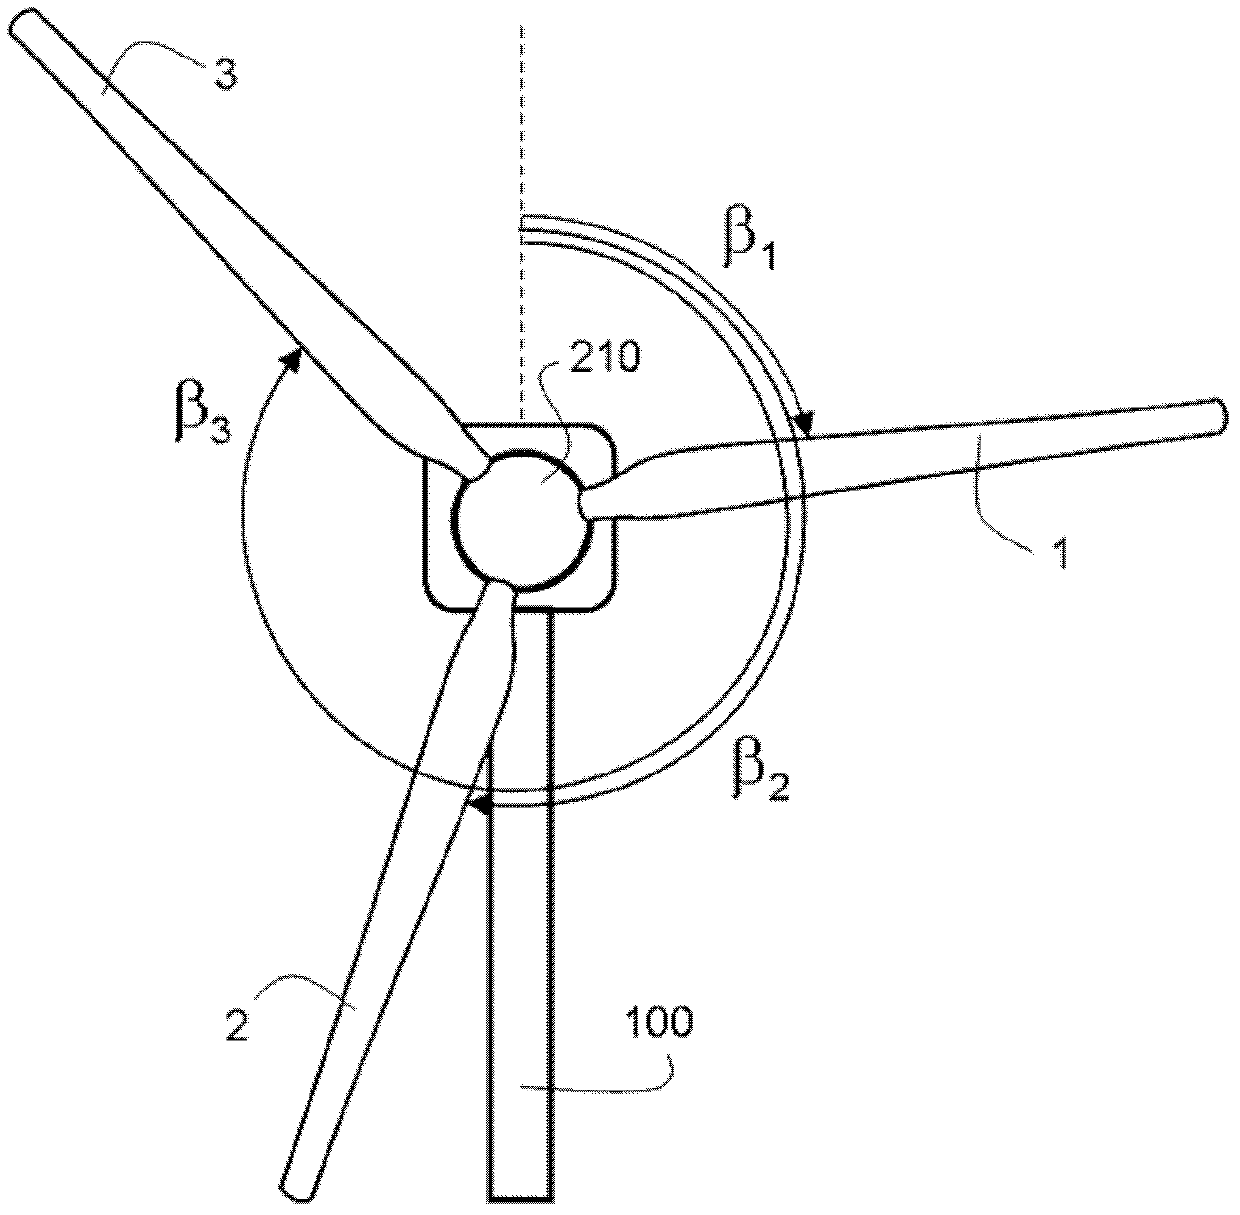 Blade load reduction for wind turbine